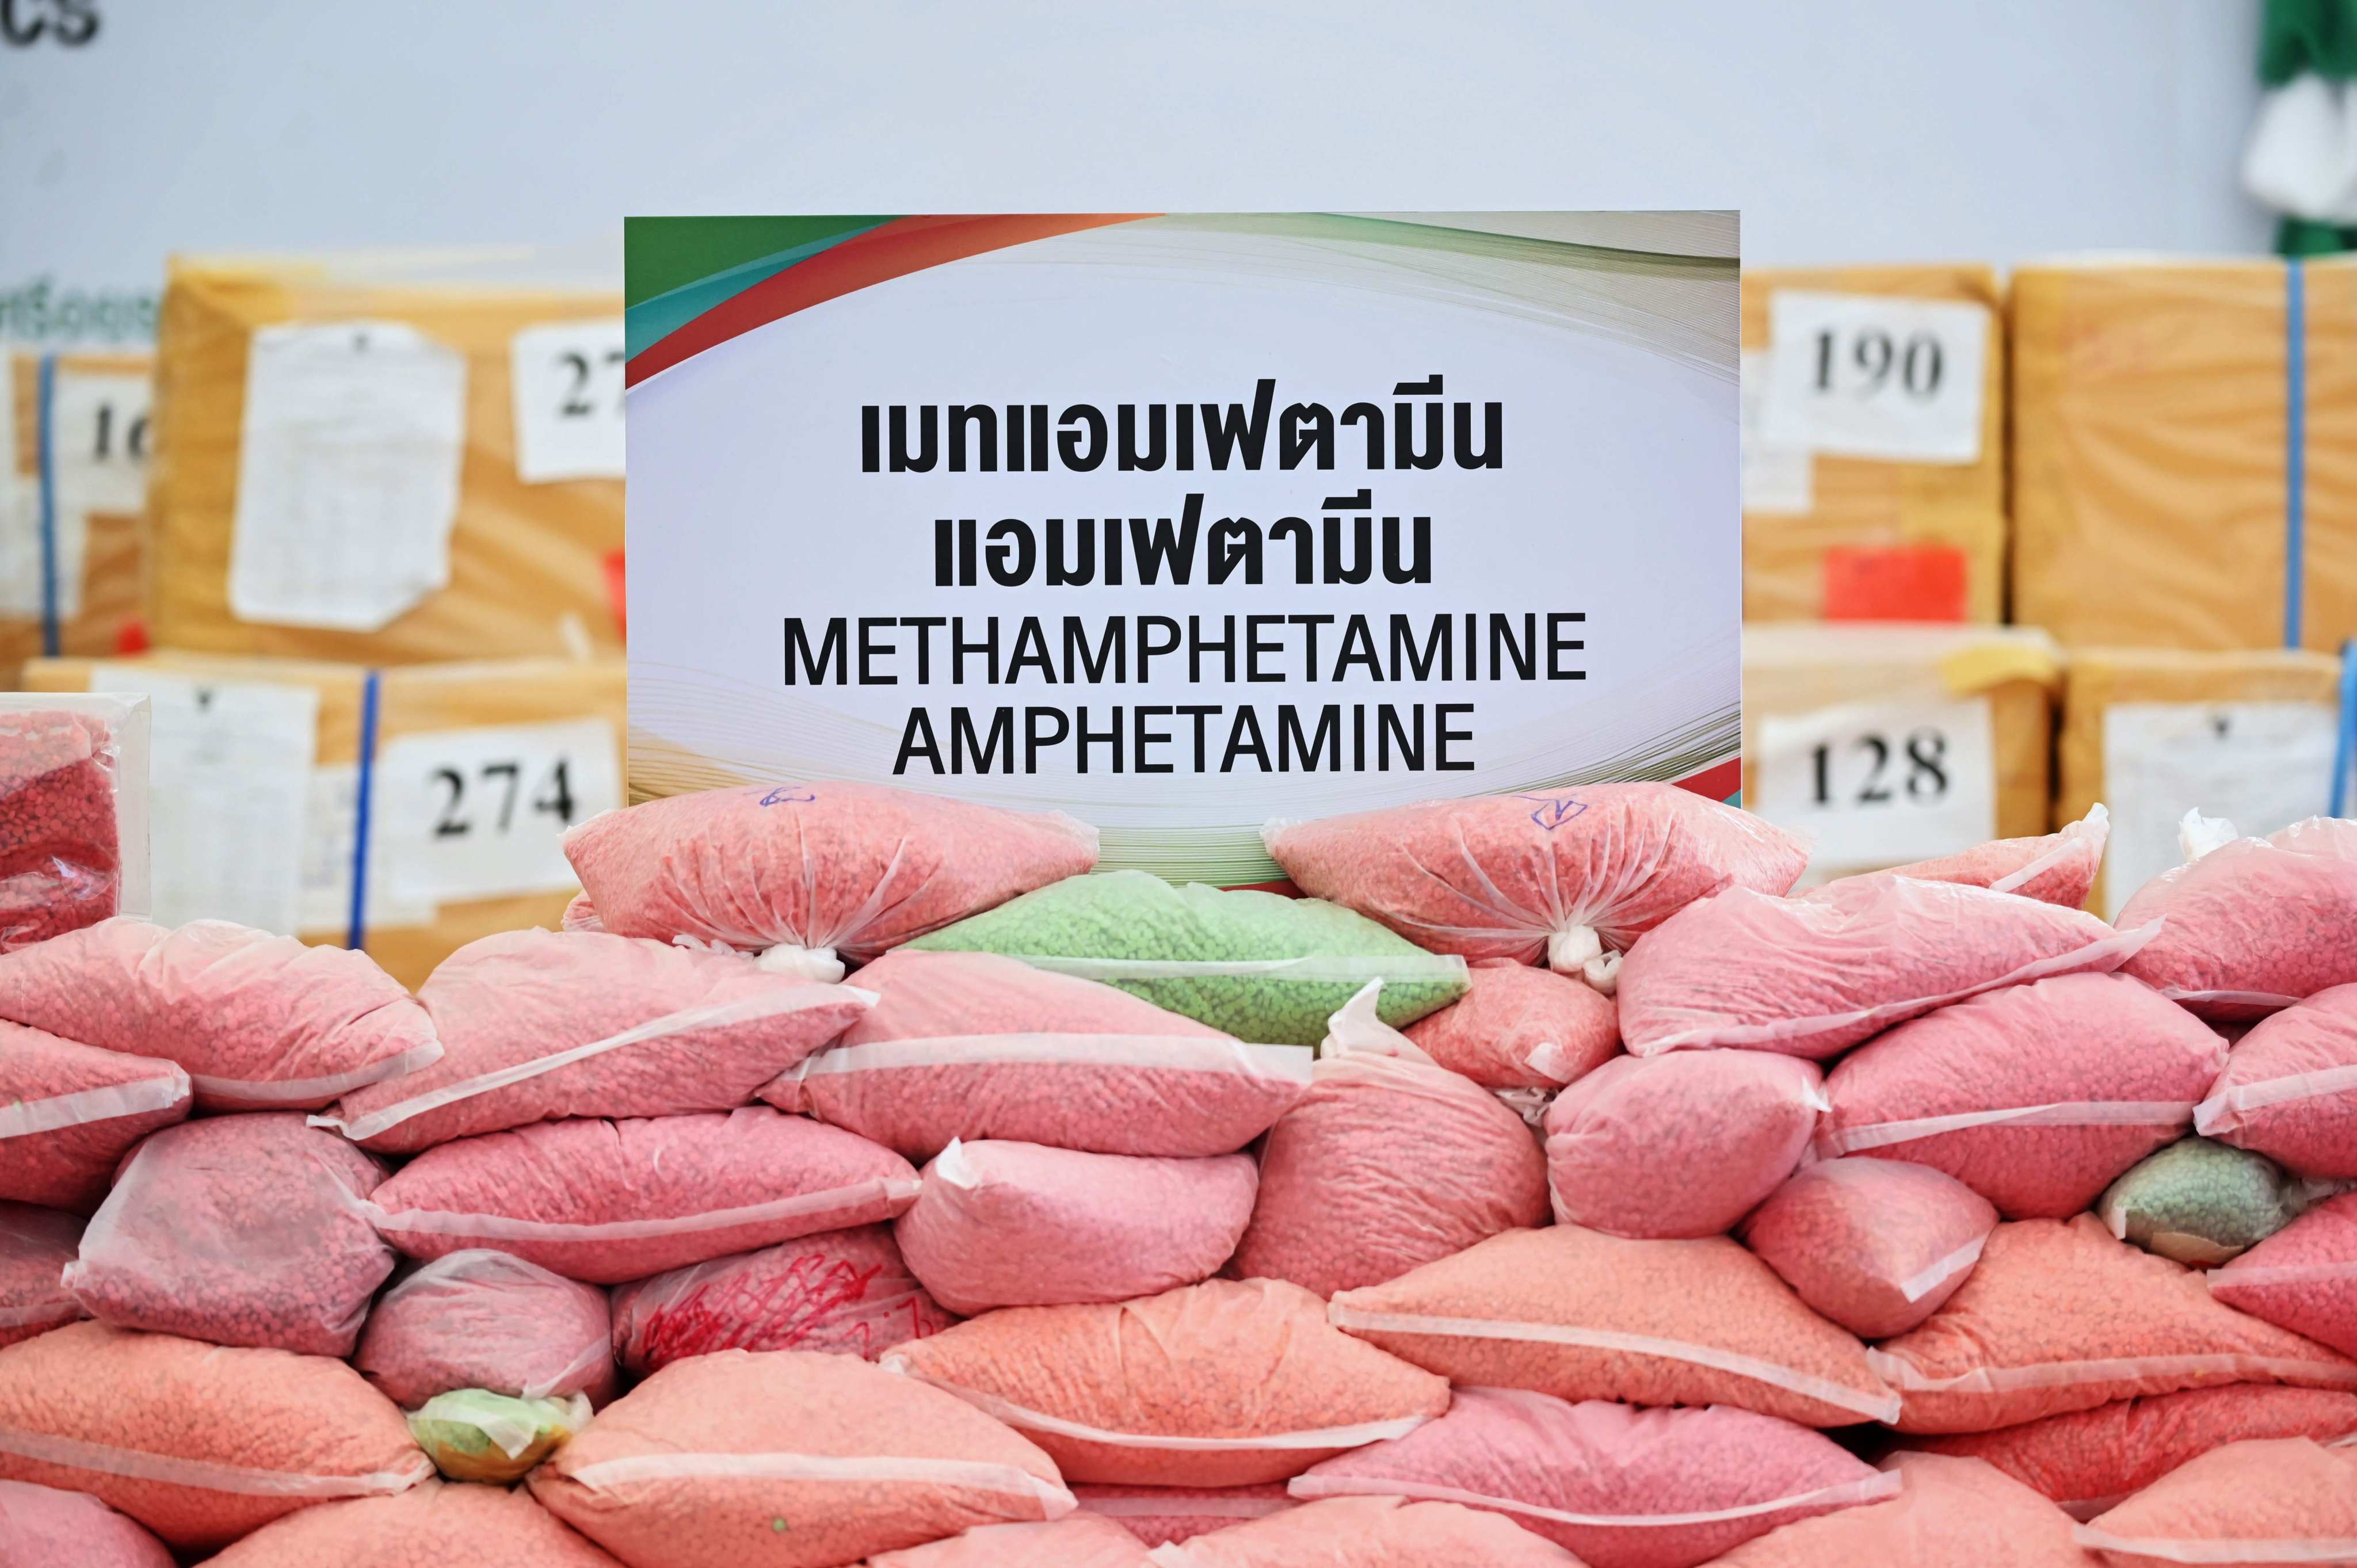 A record number of methamphetamine pills (known  as ‘ya ba’ in Thailand) were seized in the region in the past year. Photo: AFP